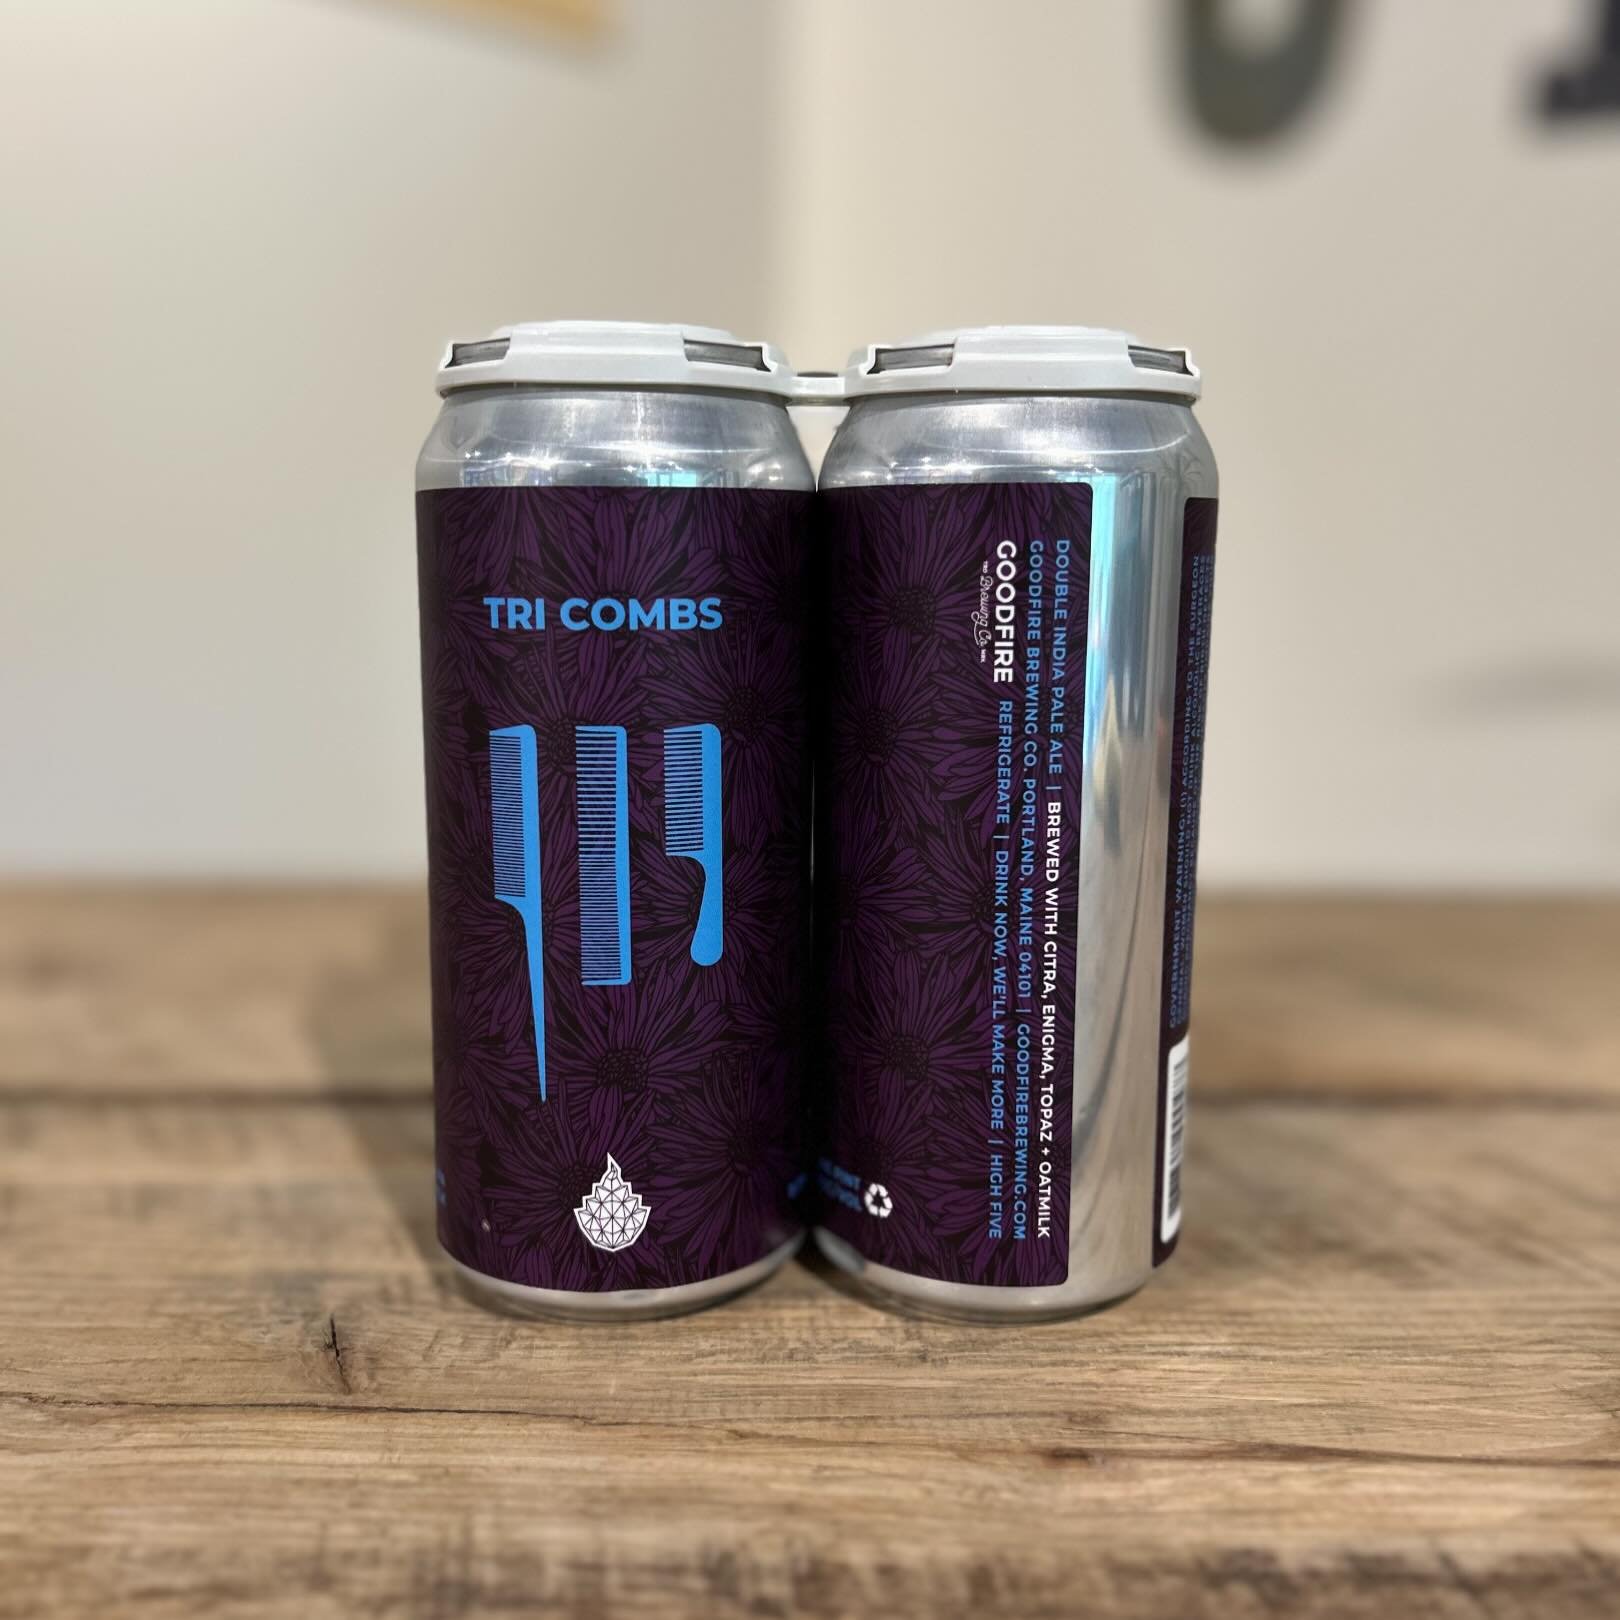 @goodfirebrewing is back in the shop this week #NowAvailable #SudburyCraftBeer #SudburyMA
&mdash;
Tri-Combs. Boy Howdy, it&rsquo;s our annual 4/20 release!

Double IPA - 8.0% abv

You know the deal - 3 forms of oats, 3 forms of combs:

Combs: Citra, 